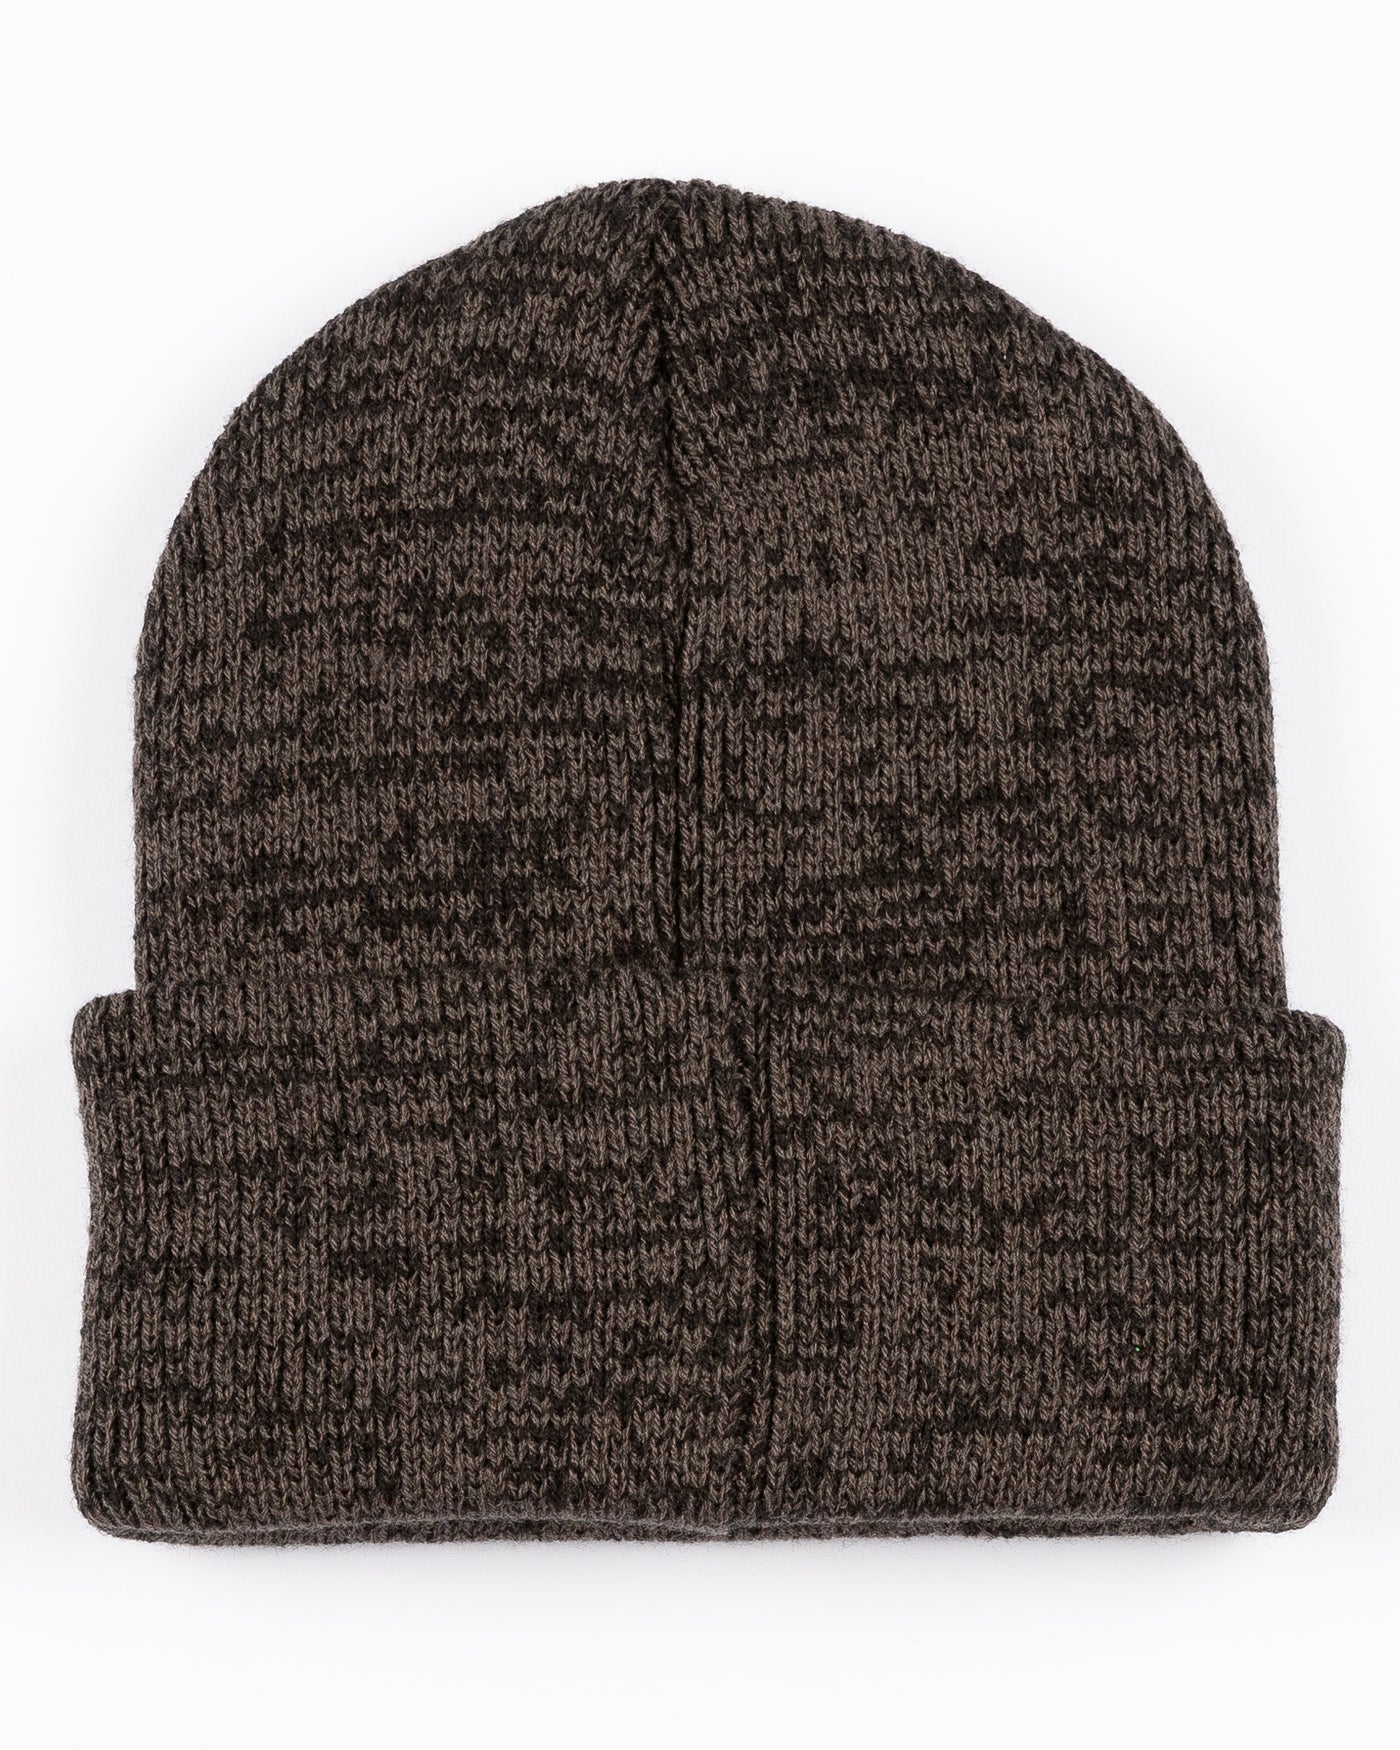 black marled knit '47 beanie with embroidered 7 and Chicago Blackhawks primary logo on front cuff - back lay flat